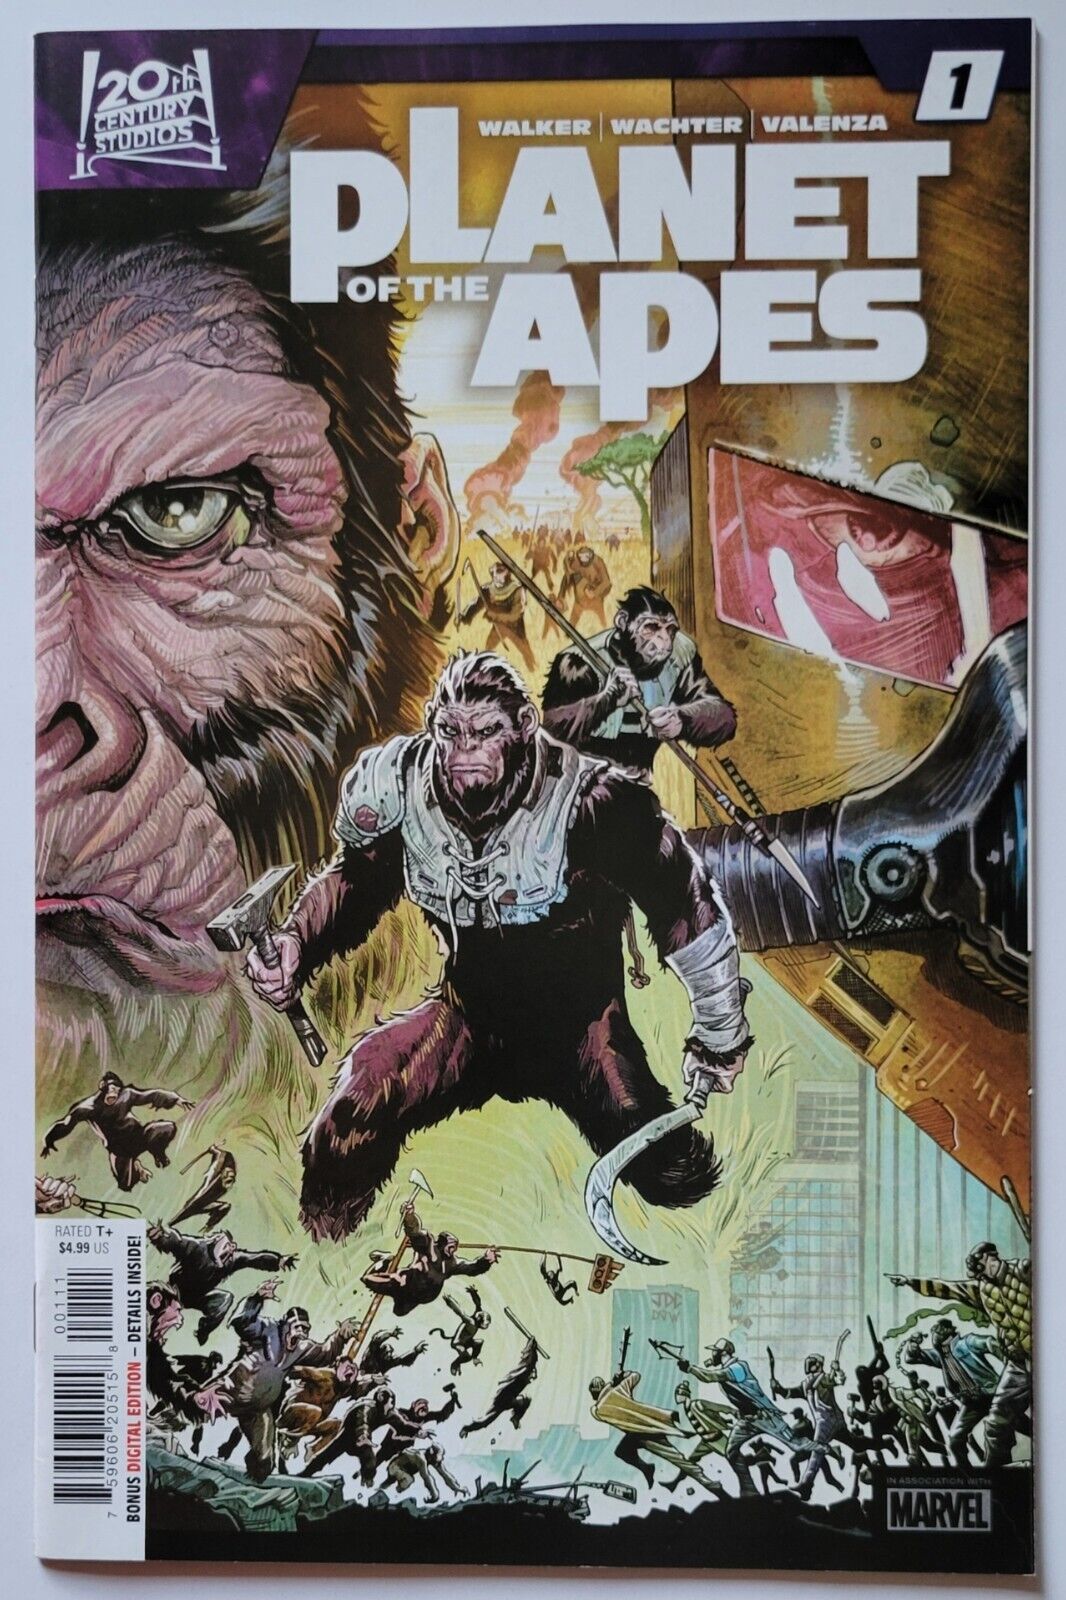 PLANET OF THE APES #1 MARVEL 2023 20th Century Studios 1st Print